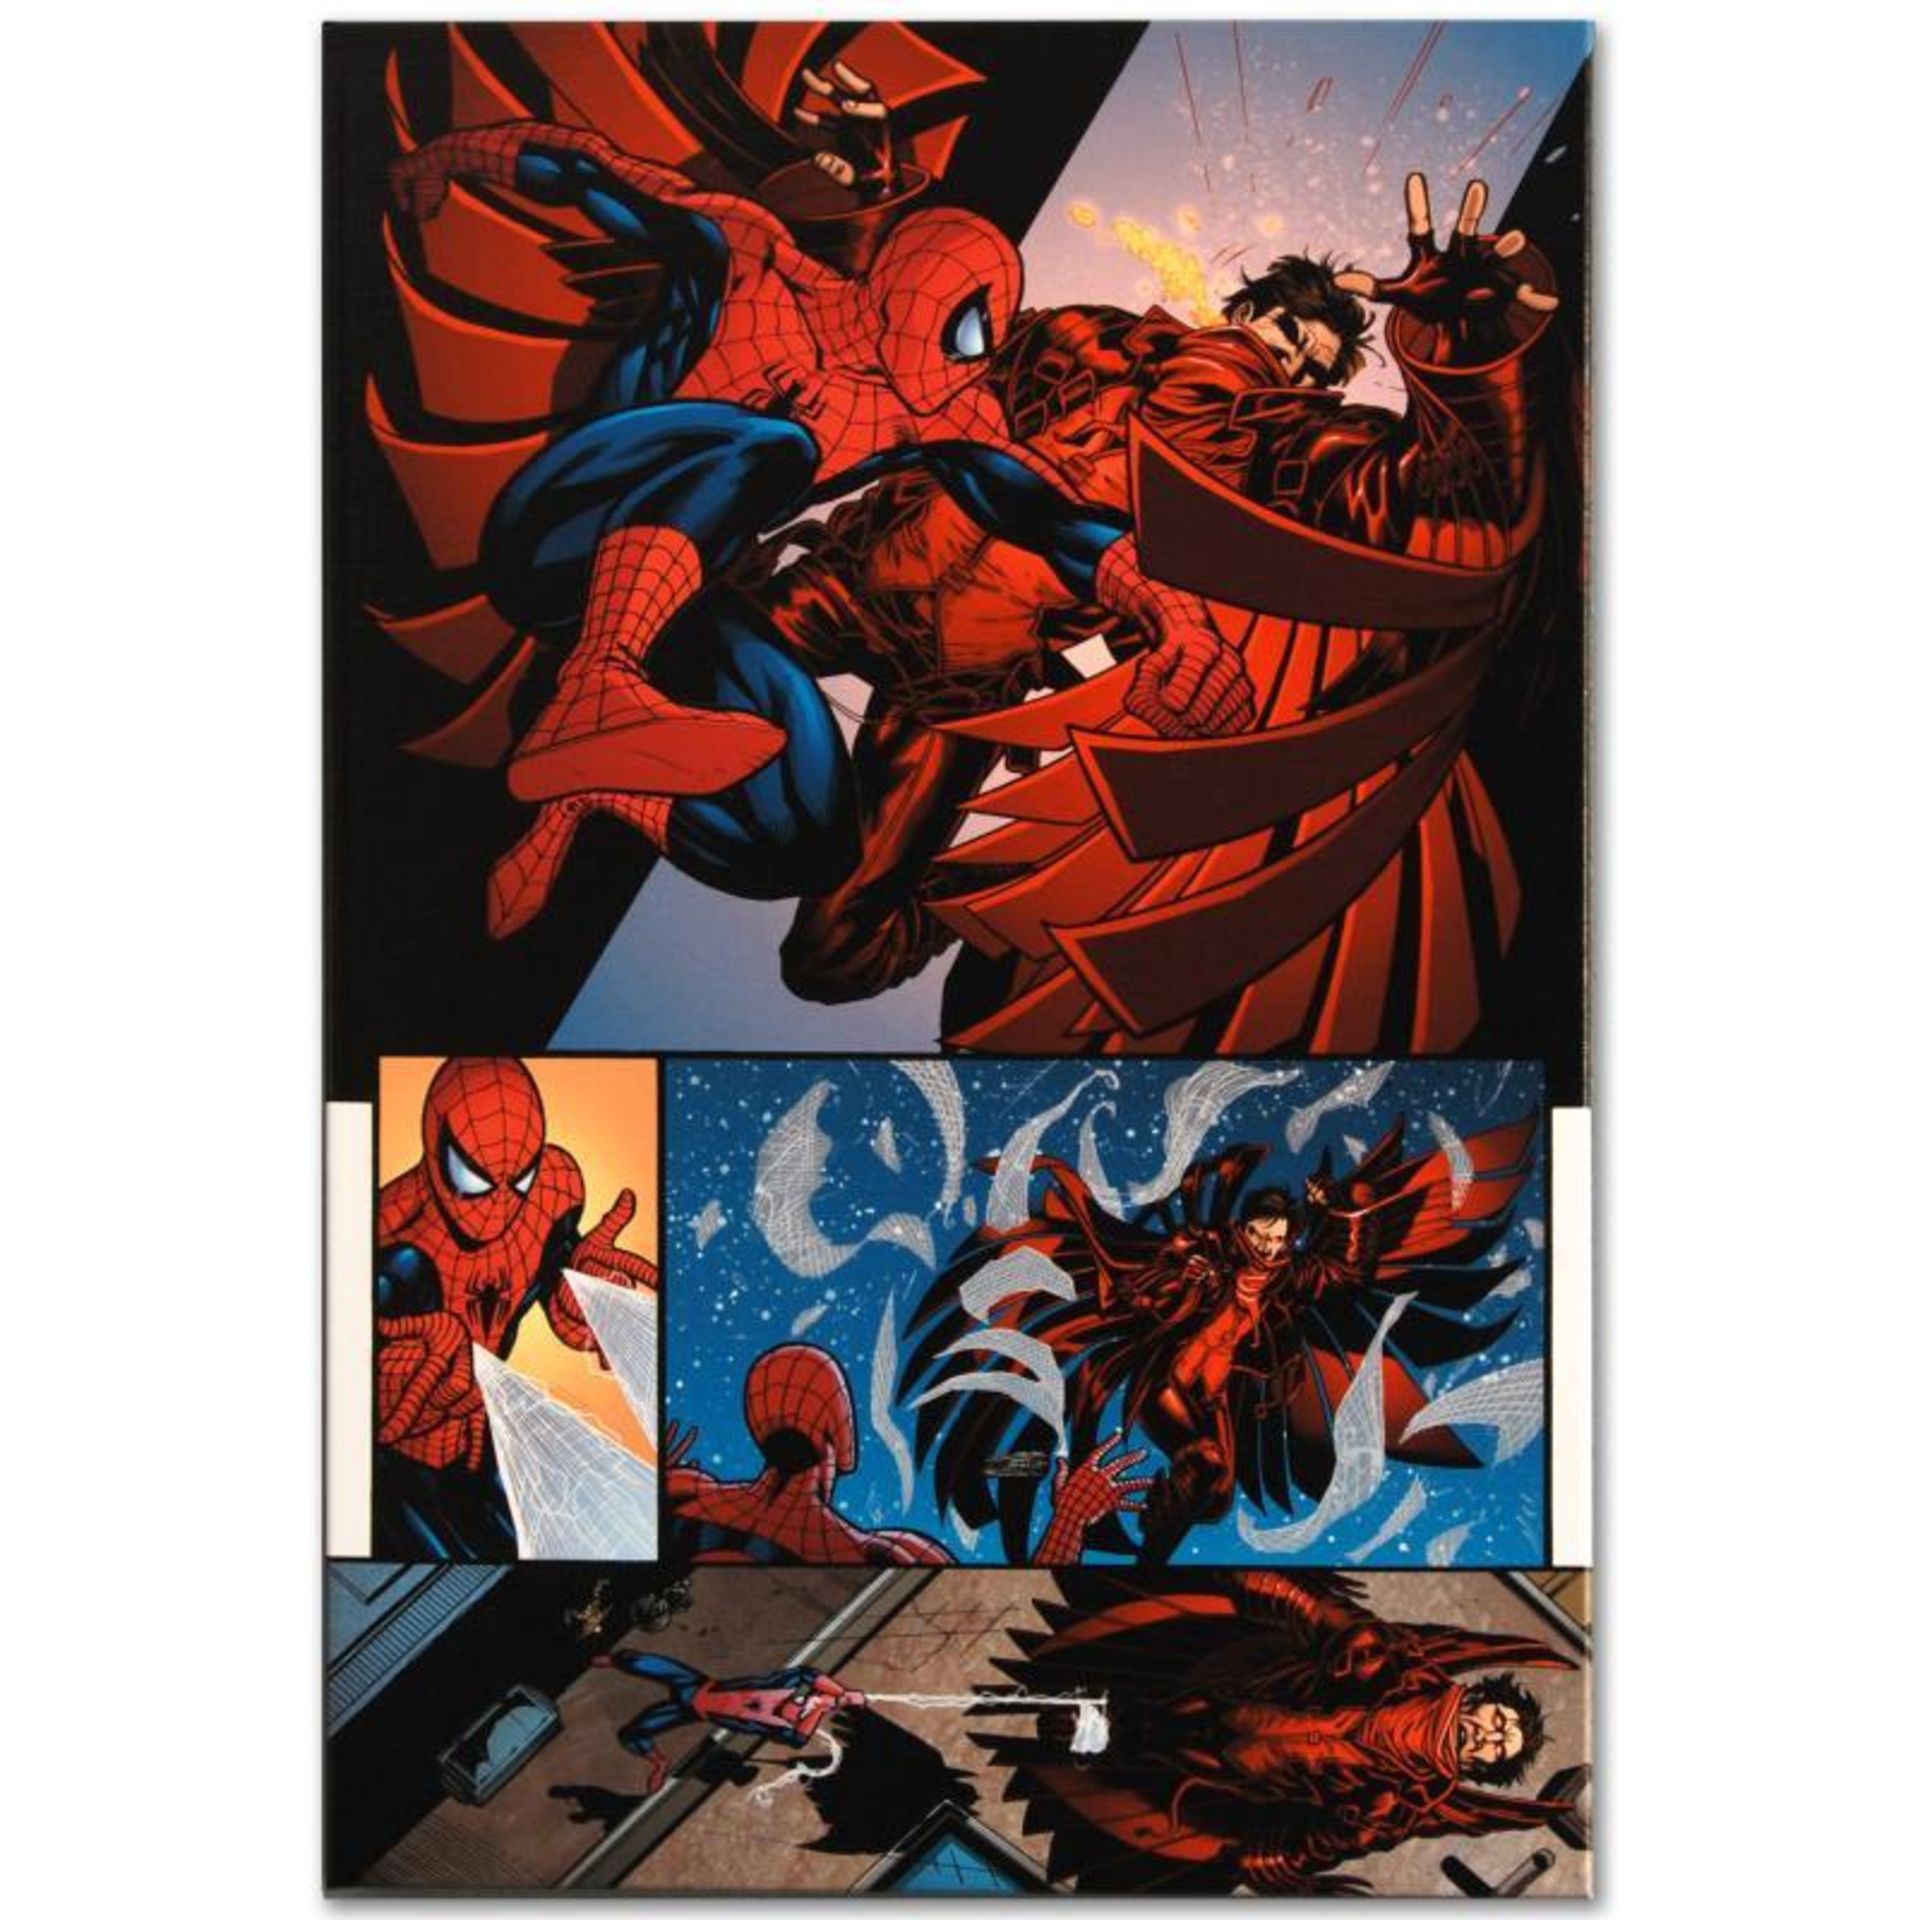 Marvel Comics "The Amazing Spider-Man #594" Numbered Limited Edition Giclee on C